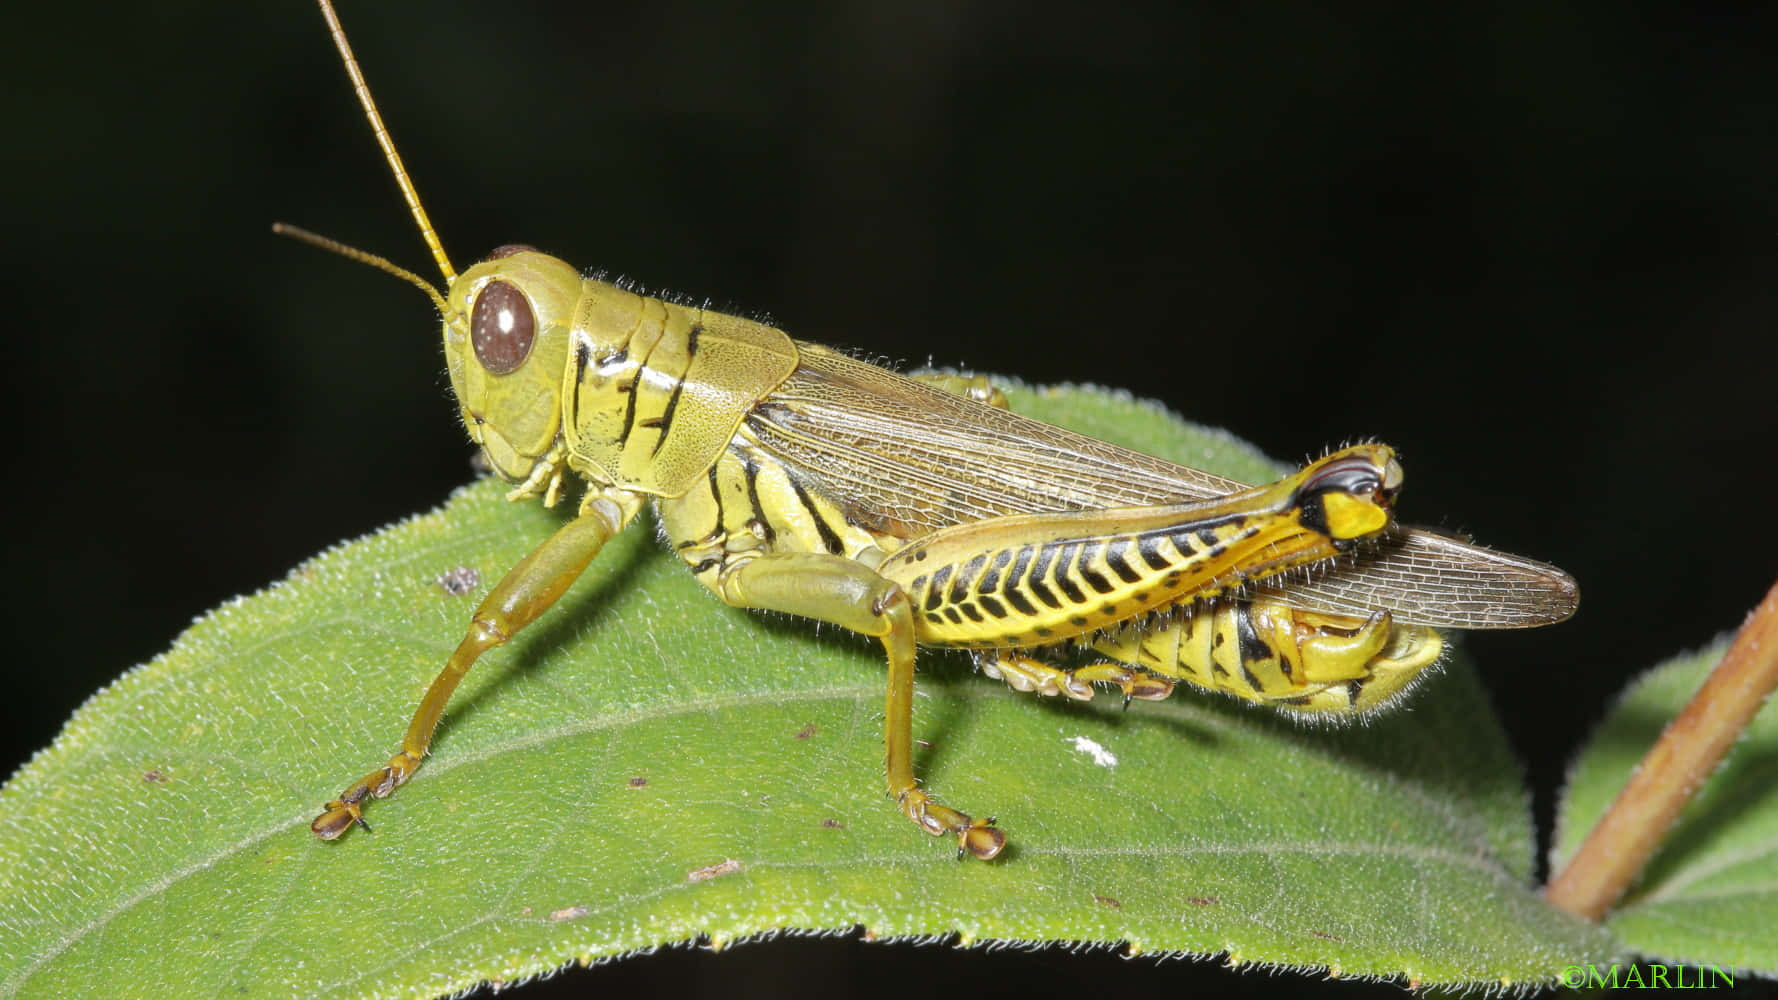 Up close with a stunning grasshopper in nature